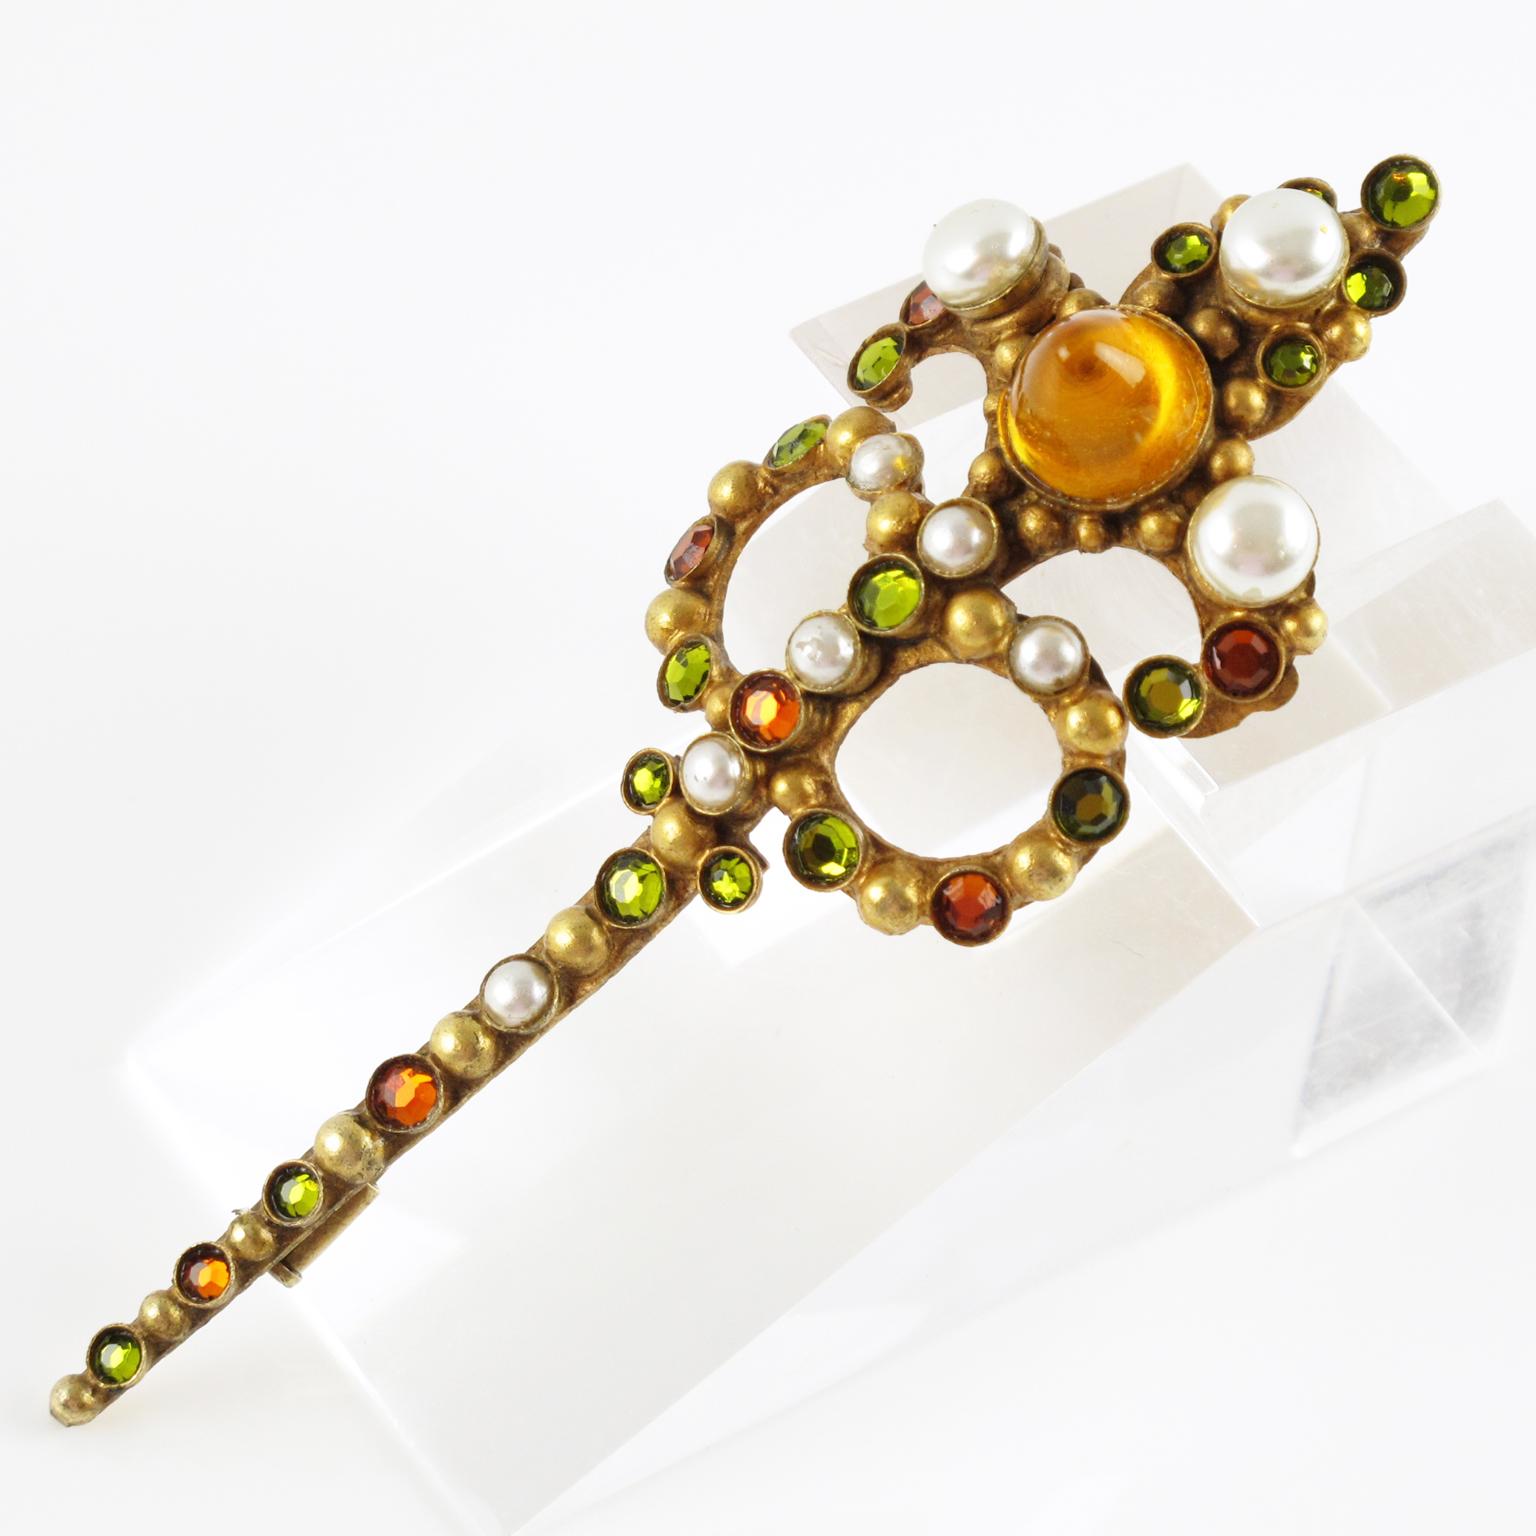 Beautiful French jewelry designer Henry Perichon (also known as Henry) extra long gilt bronze pin brooch. An elongated shape in a Renaissance design influences ornate with simulated pearls, colorful poured glass cabochons, and crystal stones. The